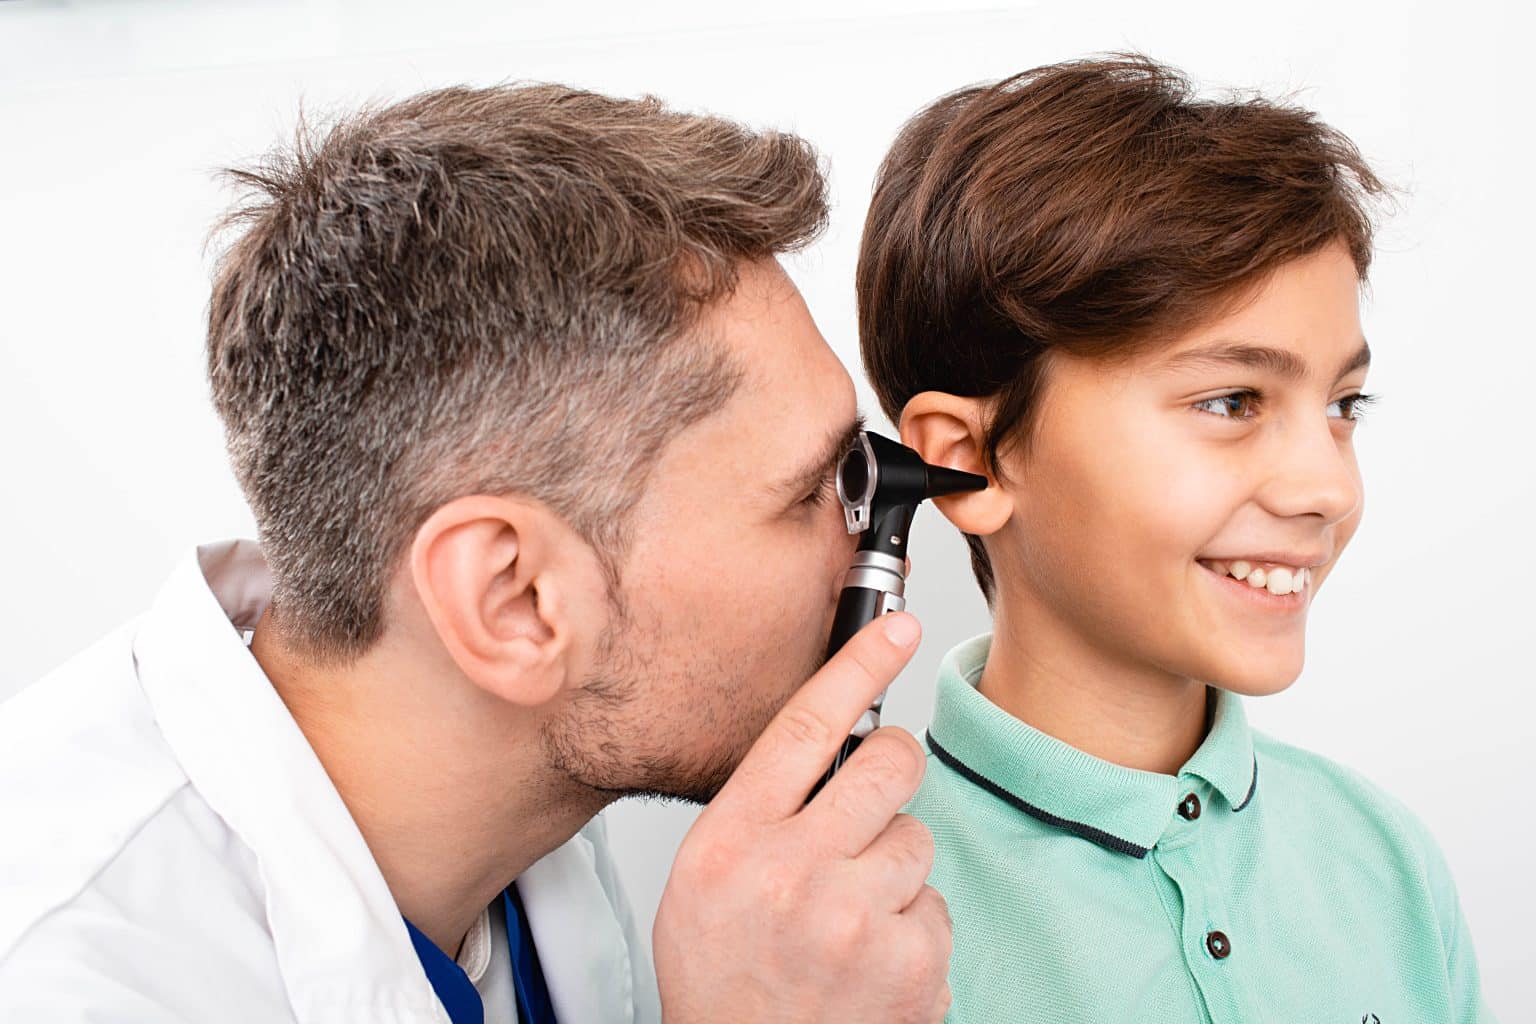 Doctor looking inside of a child's ear using a medical instrument